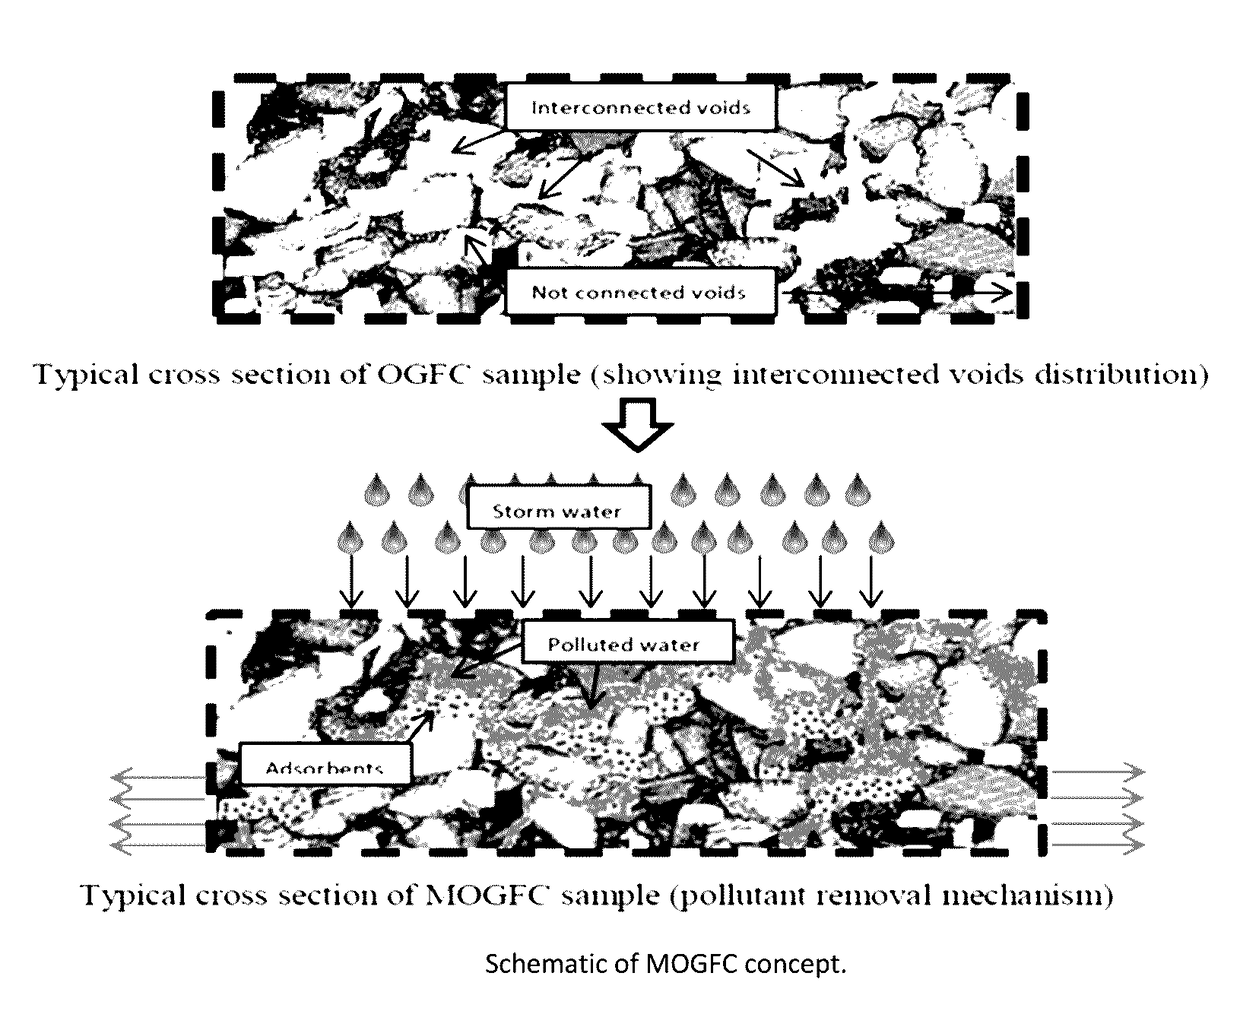 Multi-functional open graded friction course for in situ treatment of highway or roadway runoff